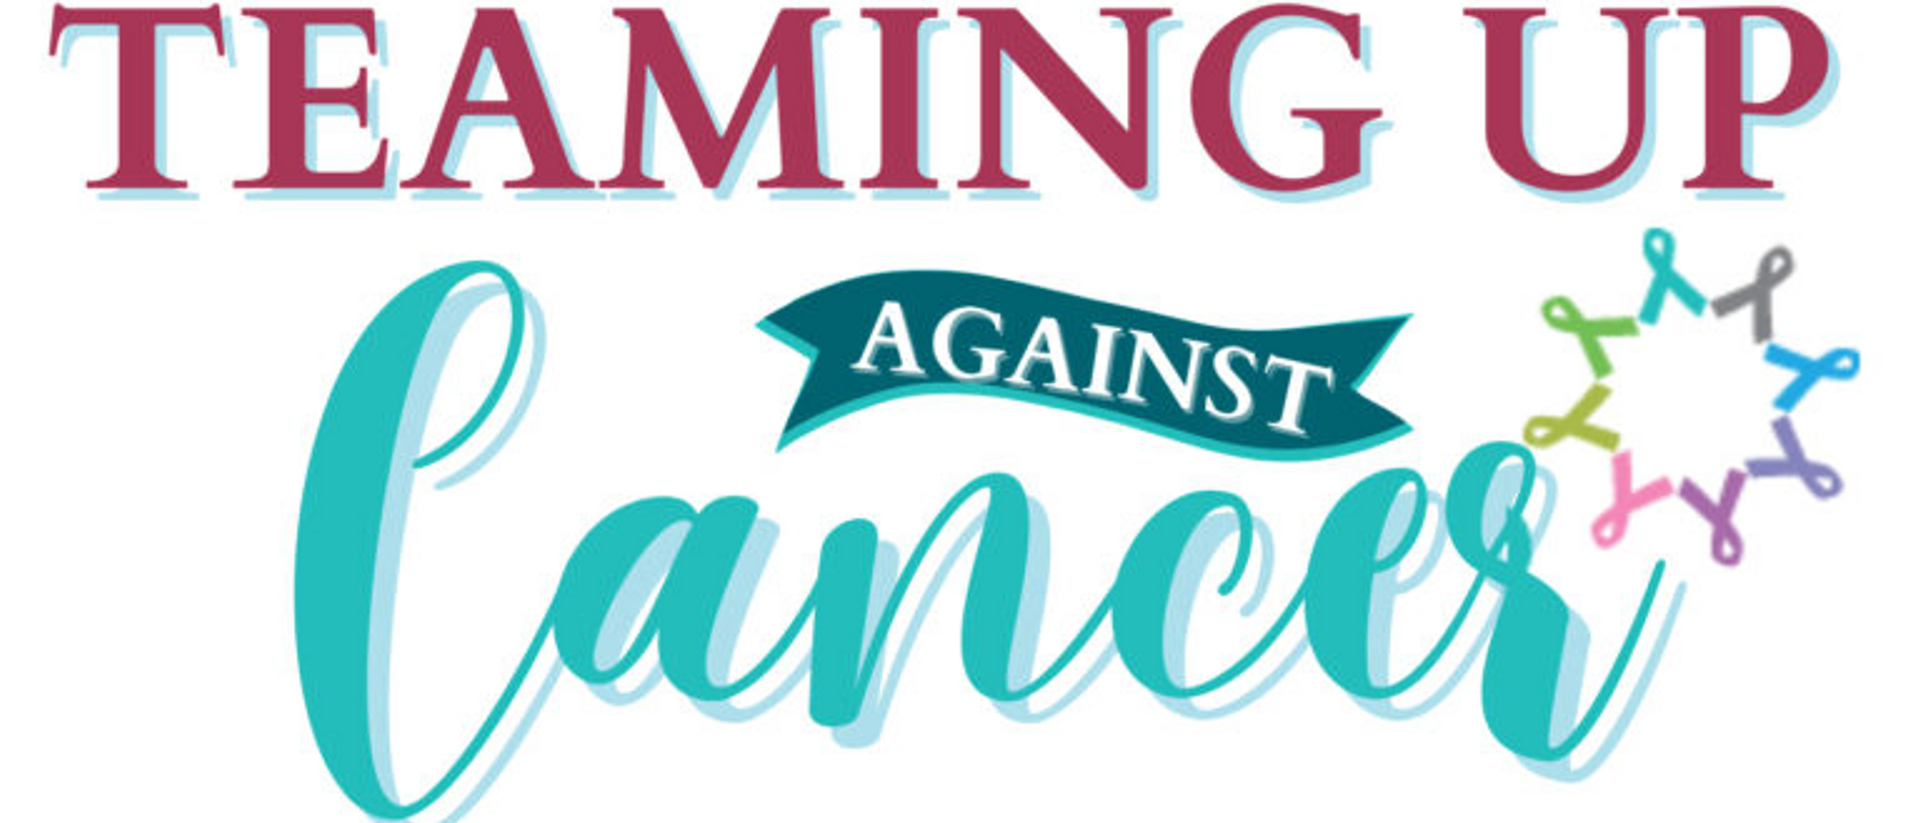 <h1 class="tribe-events-single-event-title">Team Up Against Cancer</h1>